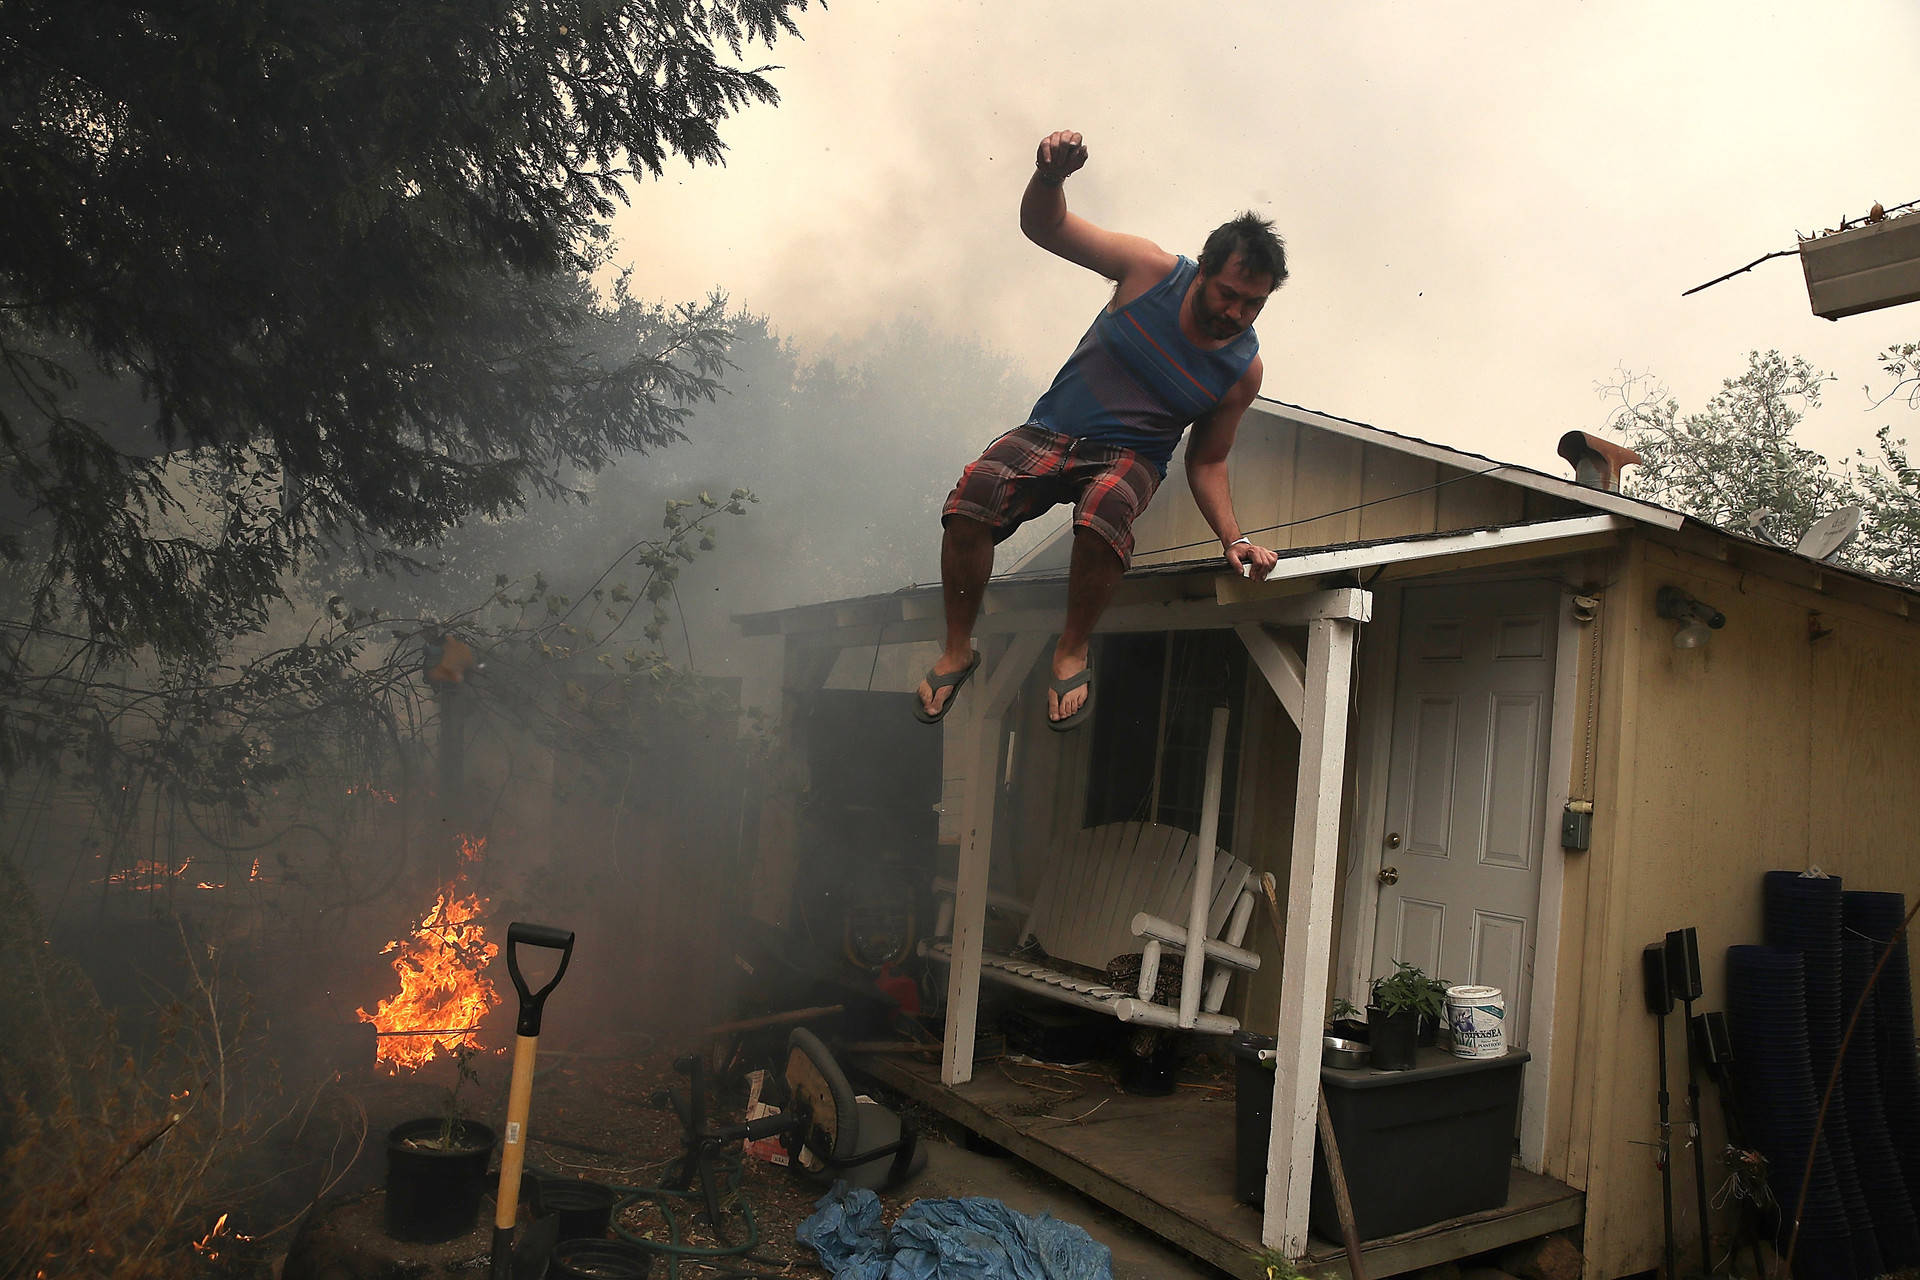 A resident rushes to save his home as an out of control wildfire moves through the area on October 9, 2017 in Glen Ellen, California. Justin Sullivan/Getty Images